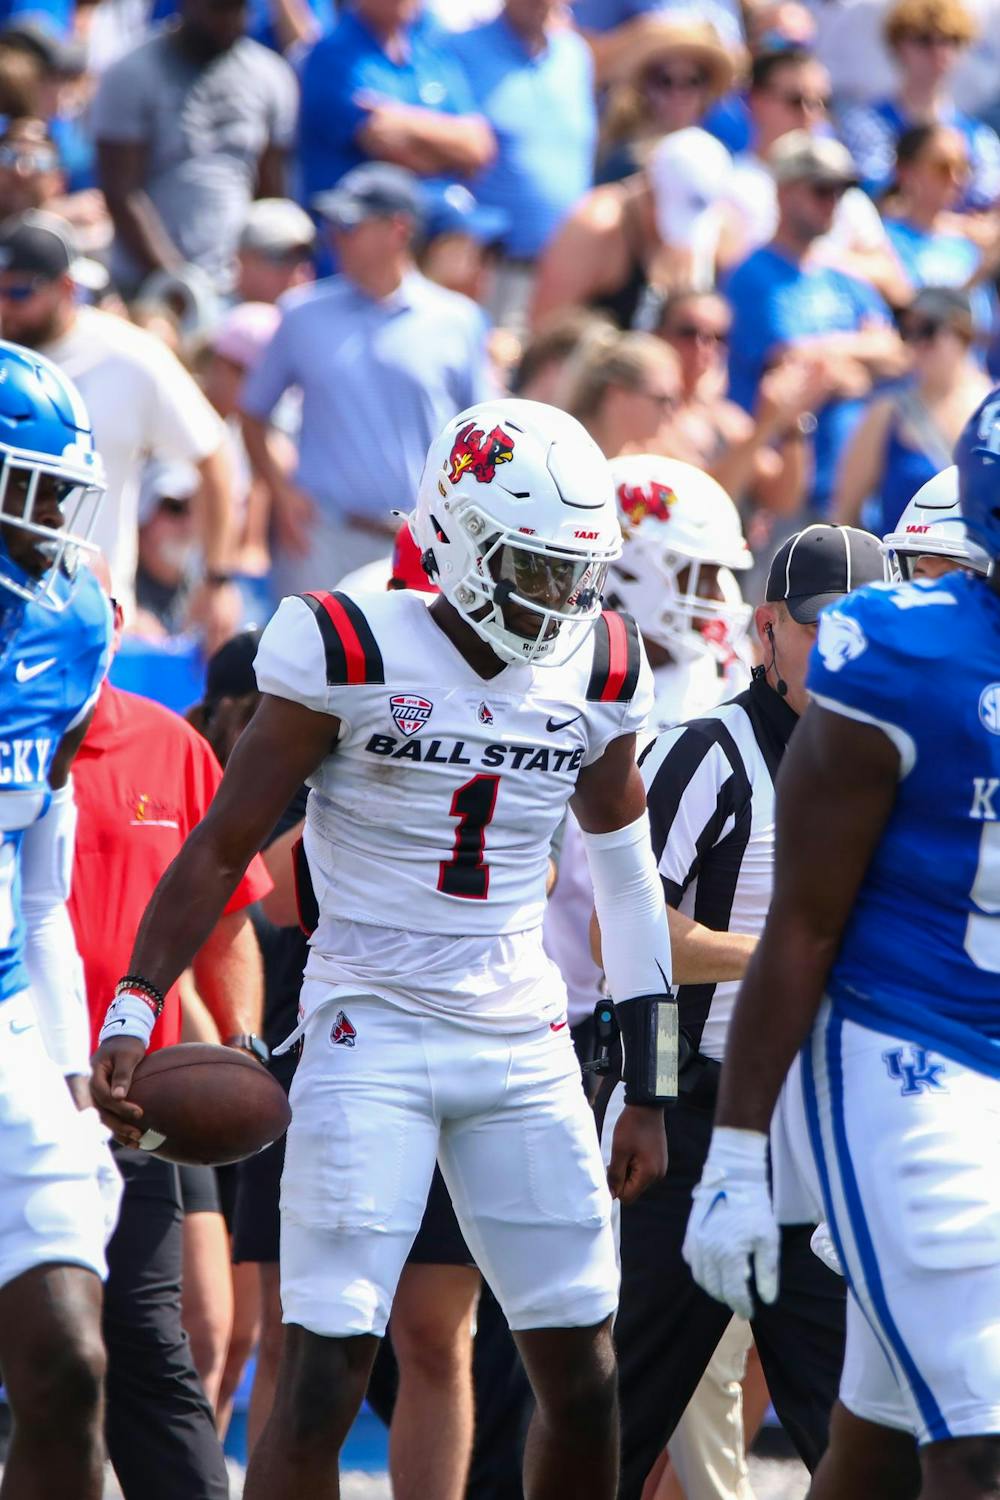 Redshirt sophomore quarterback Kiael Kelly celebrates a play against Kentucky Sept. 2. Kelly was mainly utilized in Run Pass Option plays as Ball State fell 44-14 to the Wildcats. Daniel Kehn, DN